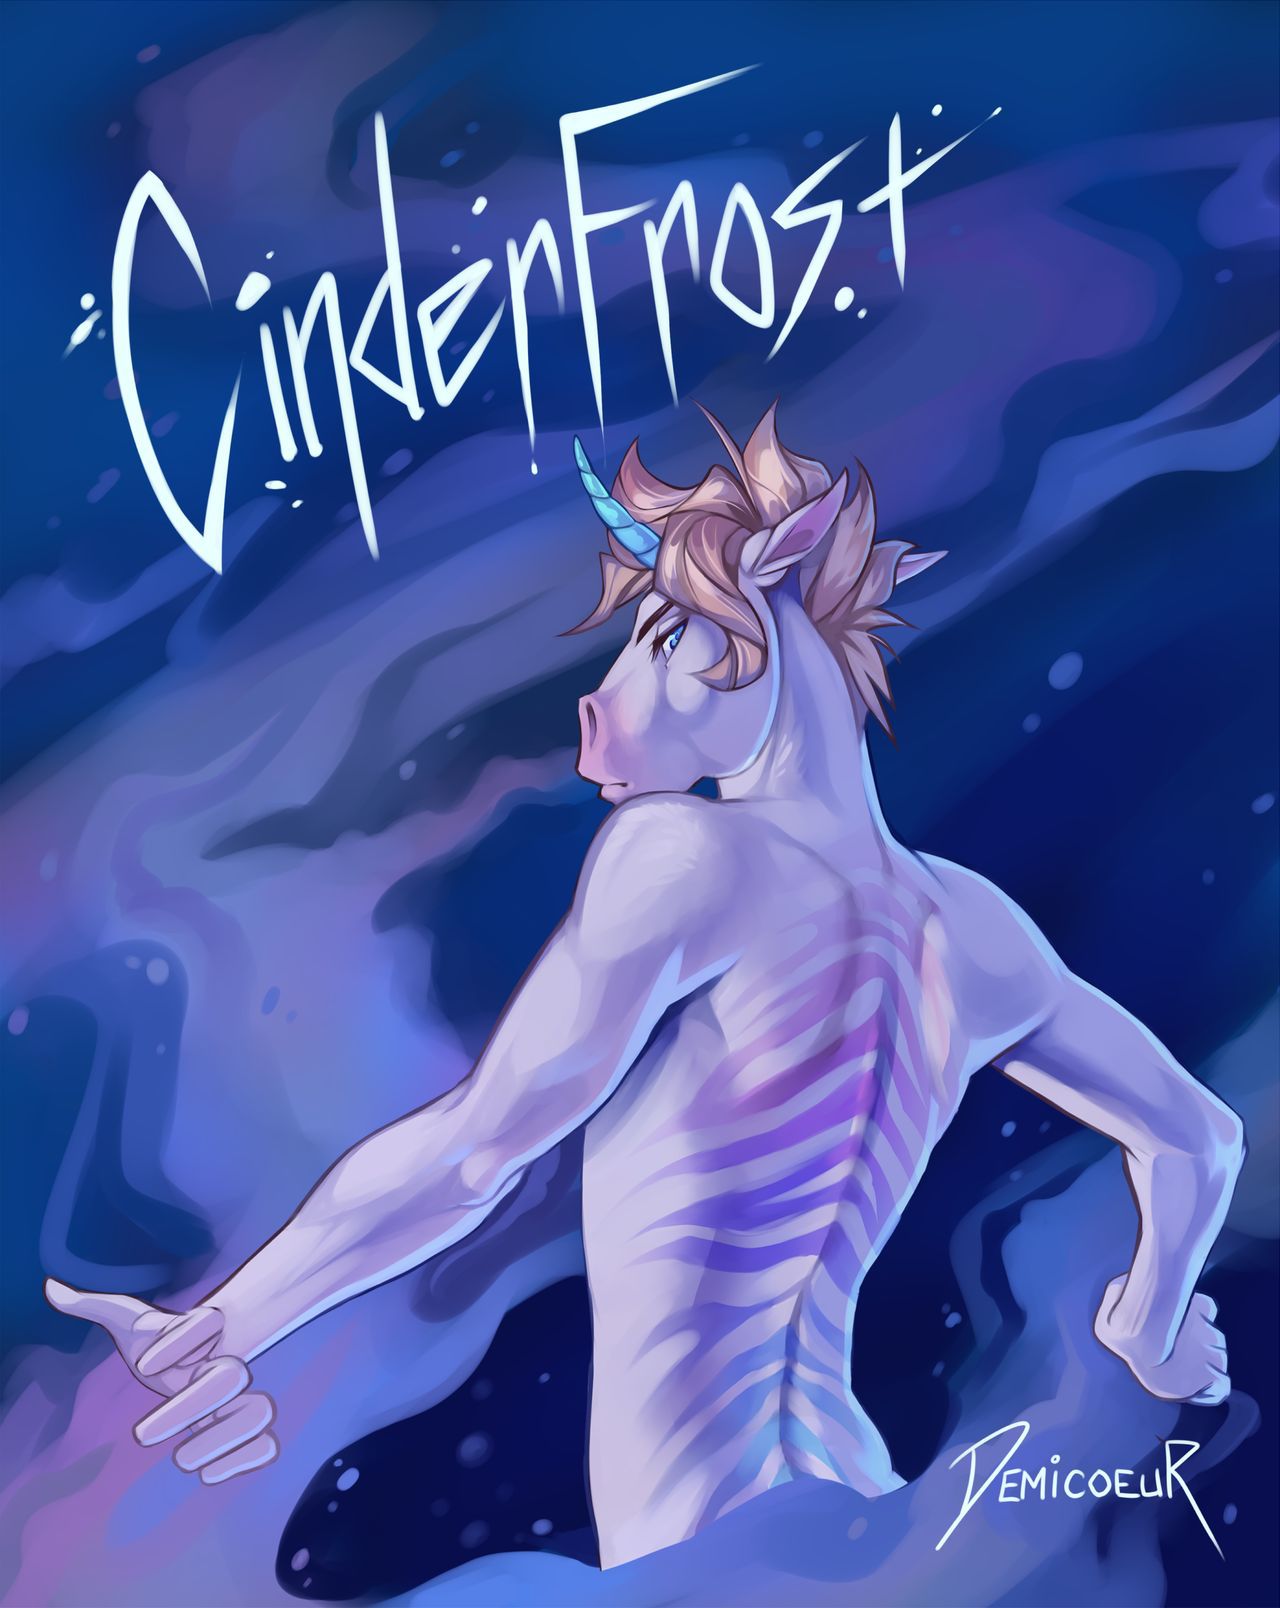 [Demicoeur] CinderFrost HD (Ongoing) 44